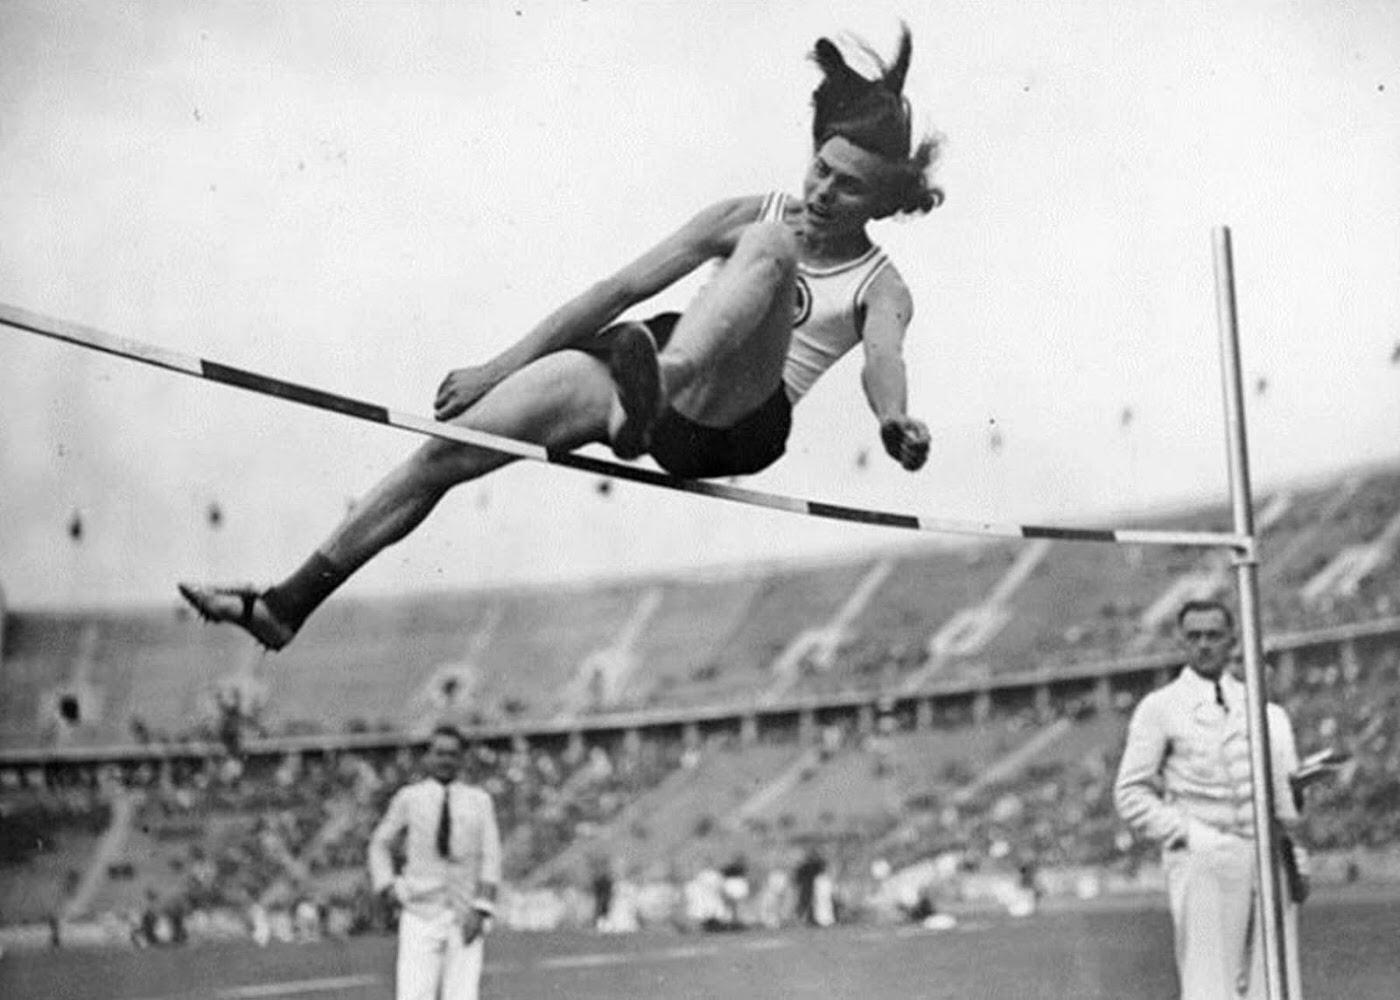 Dora Ratjen: The Man Who Dominated Women's High Jump and Other Championships